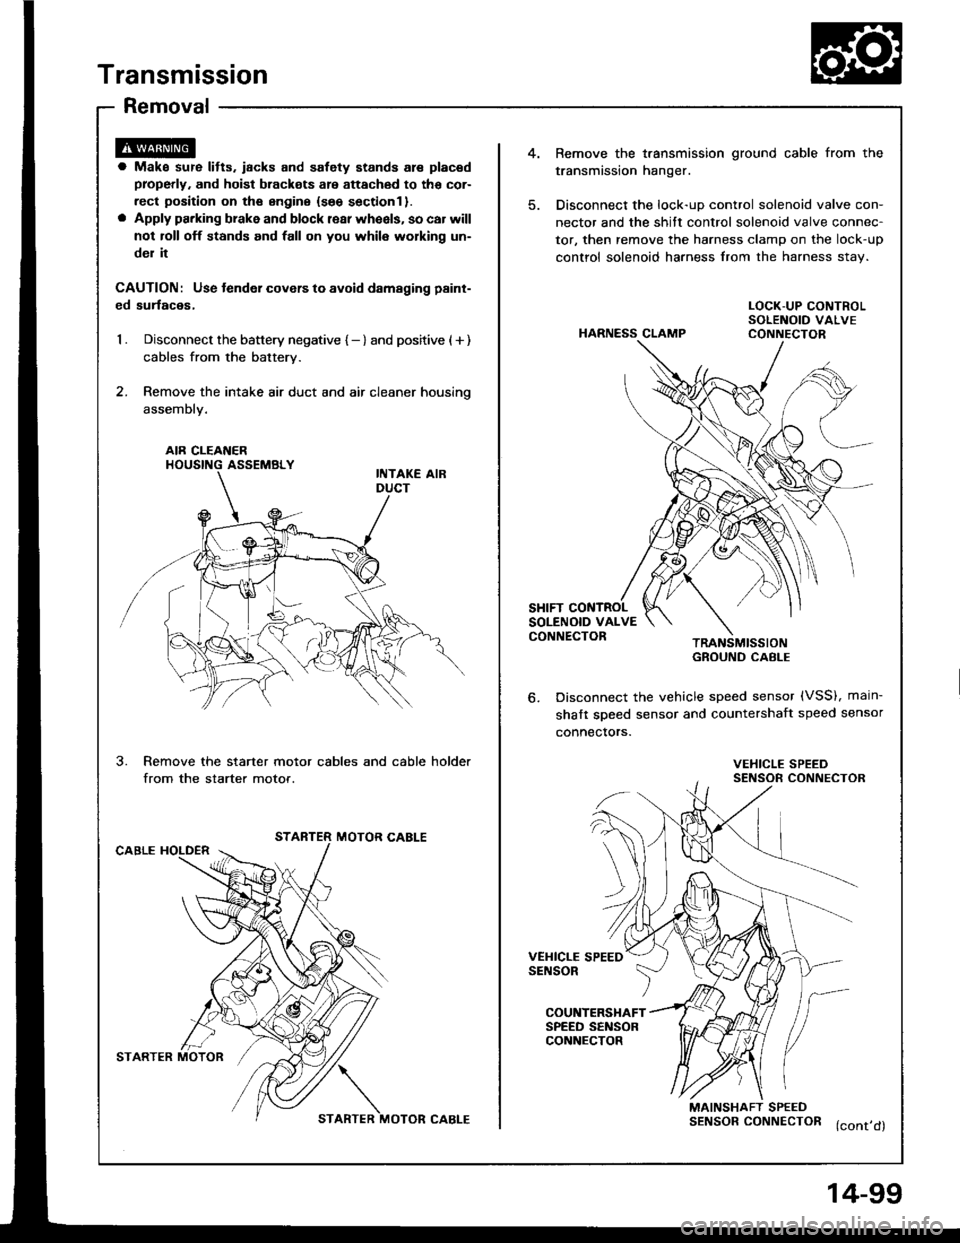 HONDA INTEGRA 1994 4.G Owners Manual Transmission
Removal
4.Bemove the t.ansmission ground cable from the
transmission hanger.
Disconnect the lock-uD control solenoid valve con-
nector and the shitt control solenoid valve connec-
tor, th